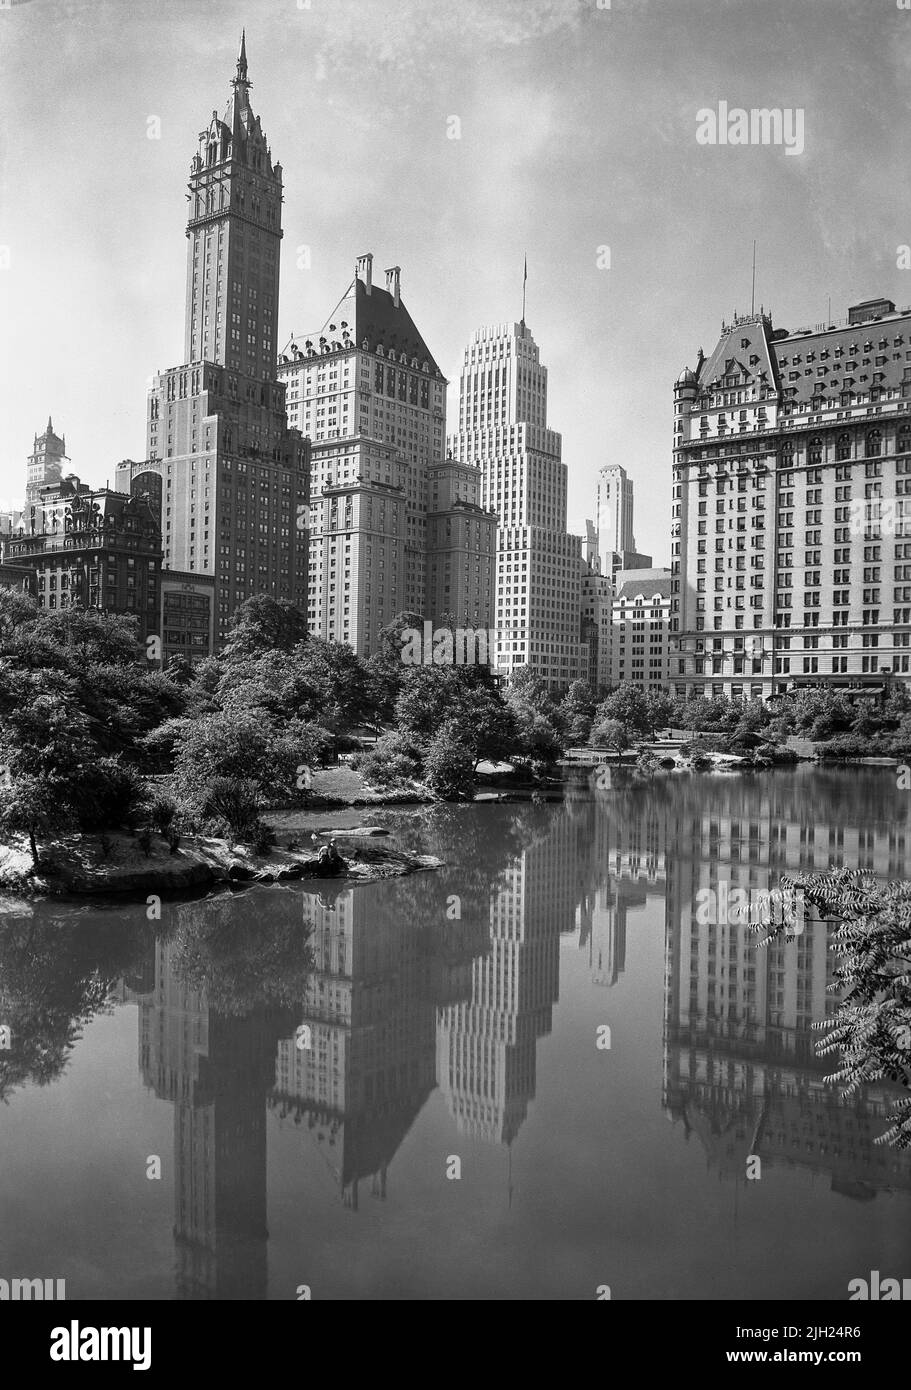 View from Central Park, Sherry-Netherland Hotel (left), Plaza Hotel (right) with Reflections in Lake, New York City, New York, USA, Gottscho-Schleisner Collection, 1933 Stock Photo